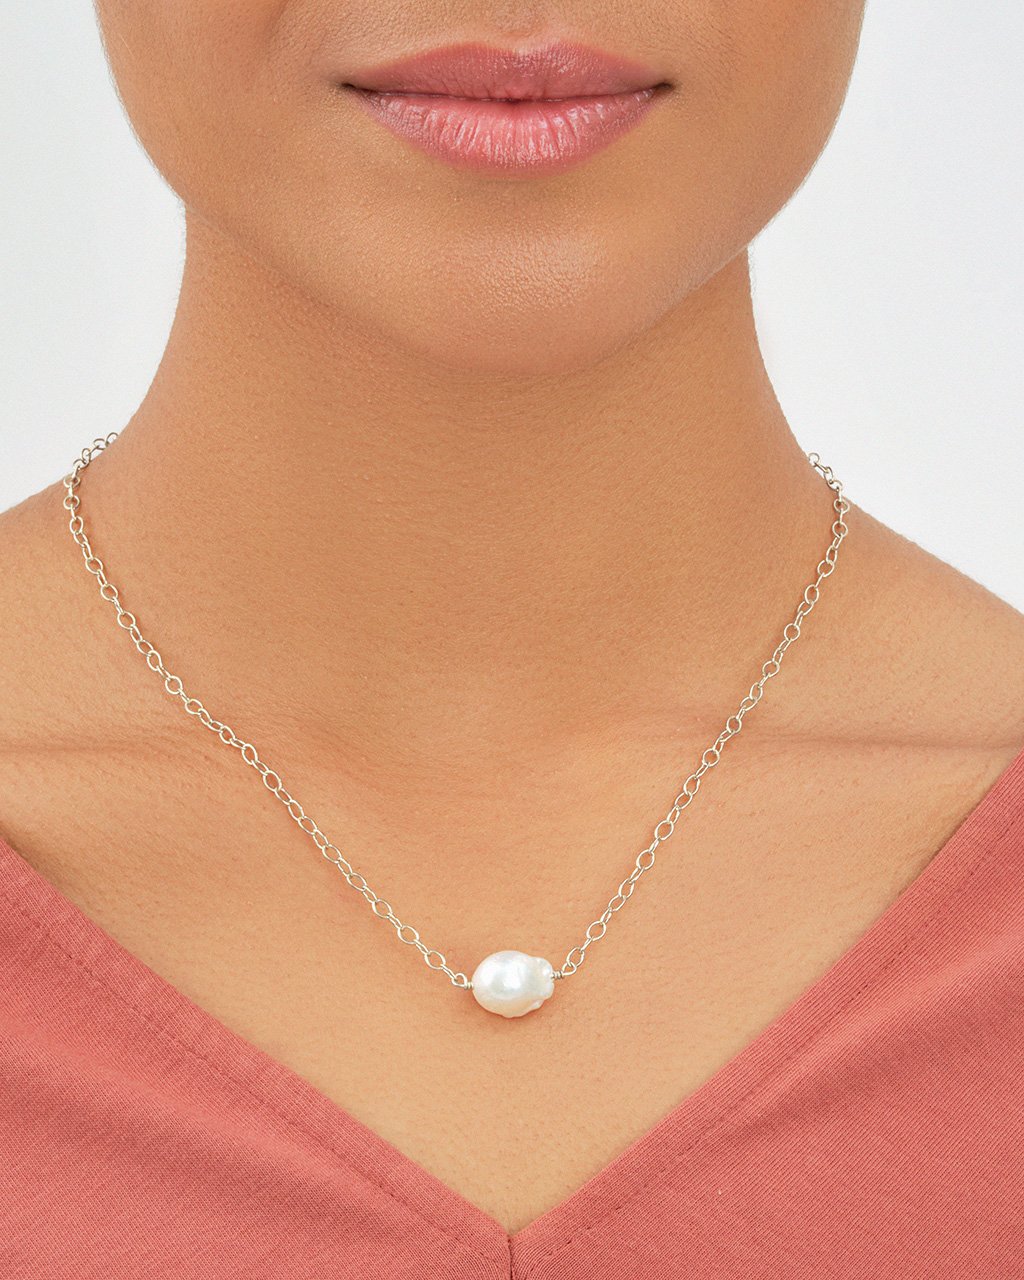 Medium Pearl Pendant Necklace Necklace Sterling Forever 